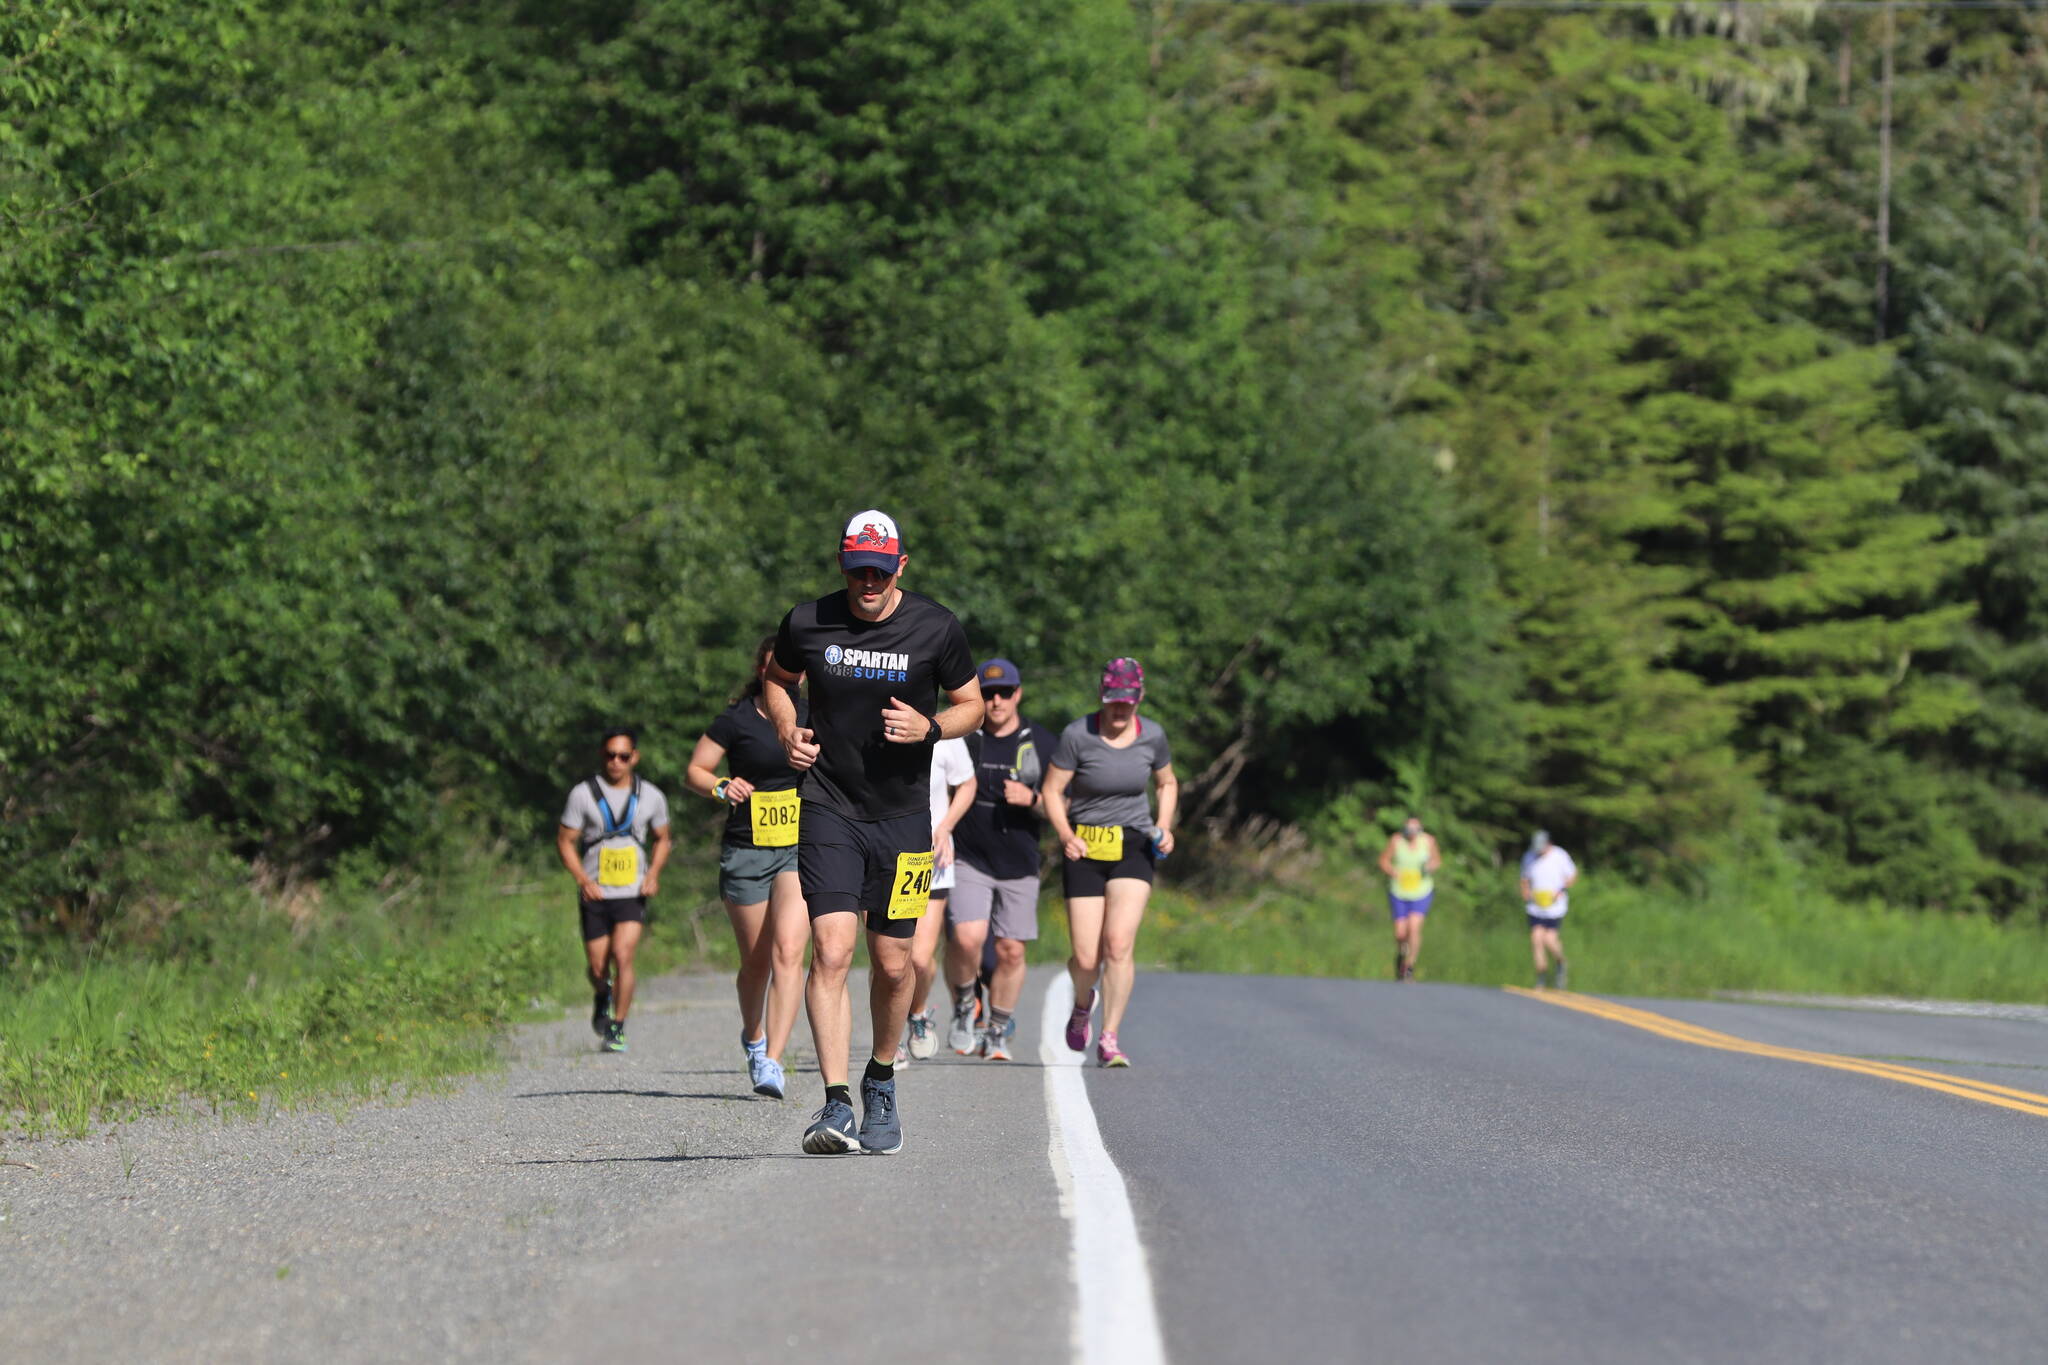 Runners pound up Fish Creek Road towards the ski area during the Eaglecrest Road and Ridge Race on July 2, 2022. (Michael S. Lockett / Juneau Empire)